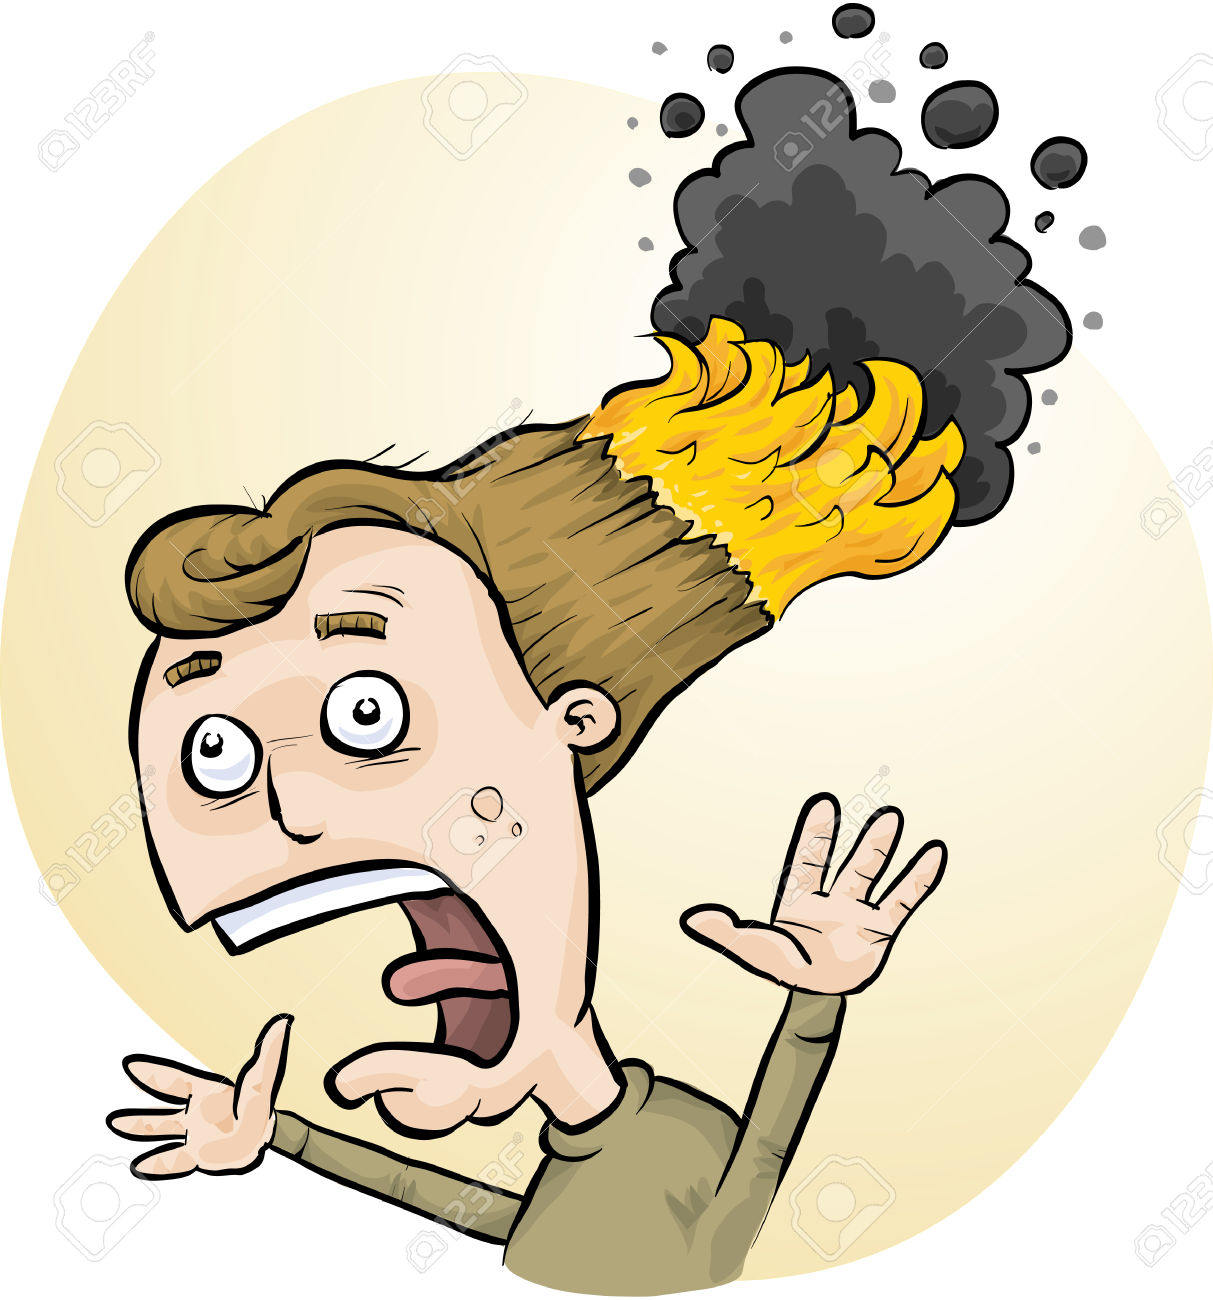 Girl with hair on fire clipart.